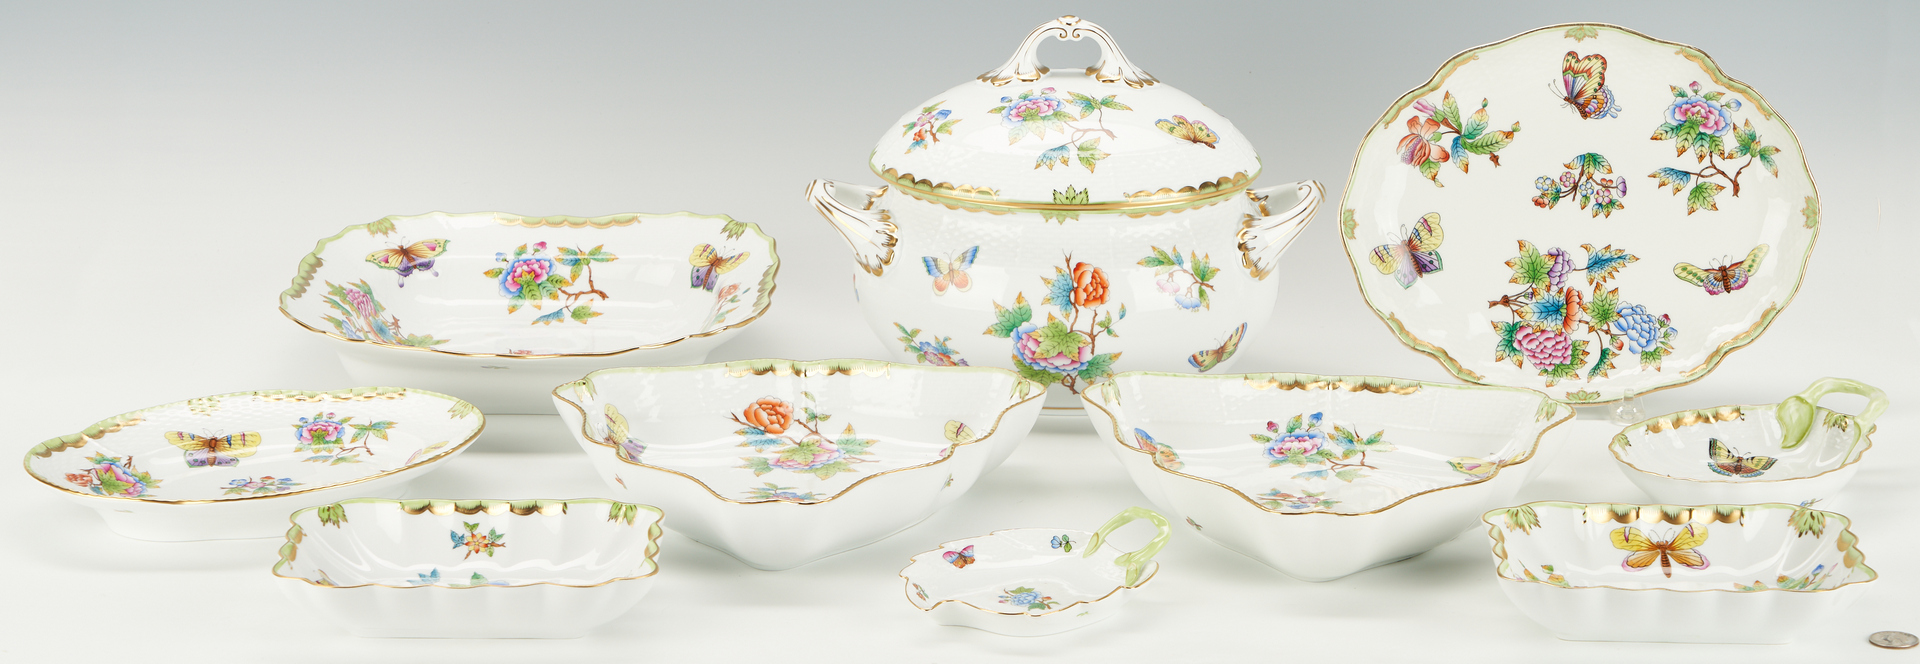 Lot 365: 10 Herend Queen Victoria Table Service Items, incl. Lidded Tureen